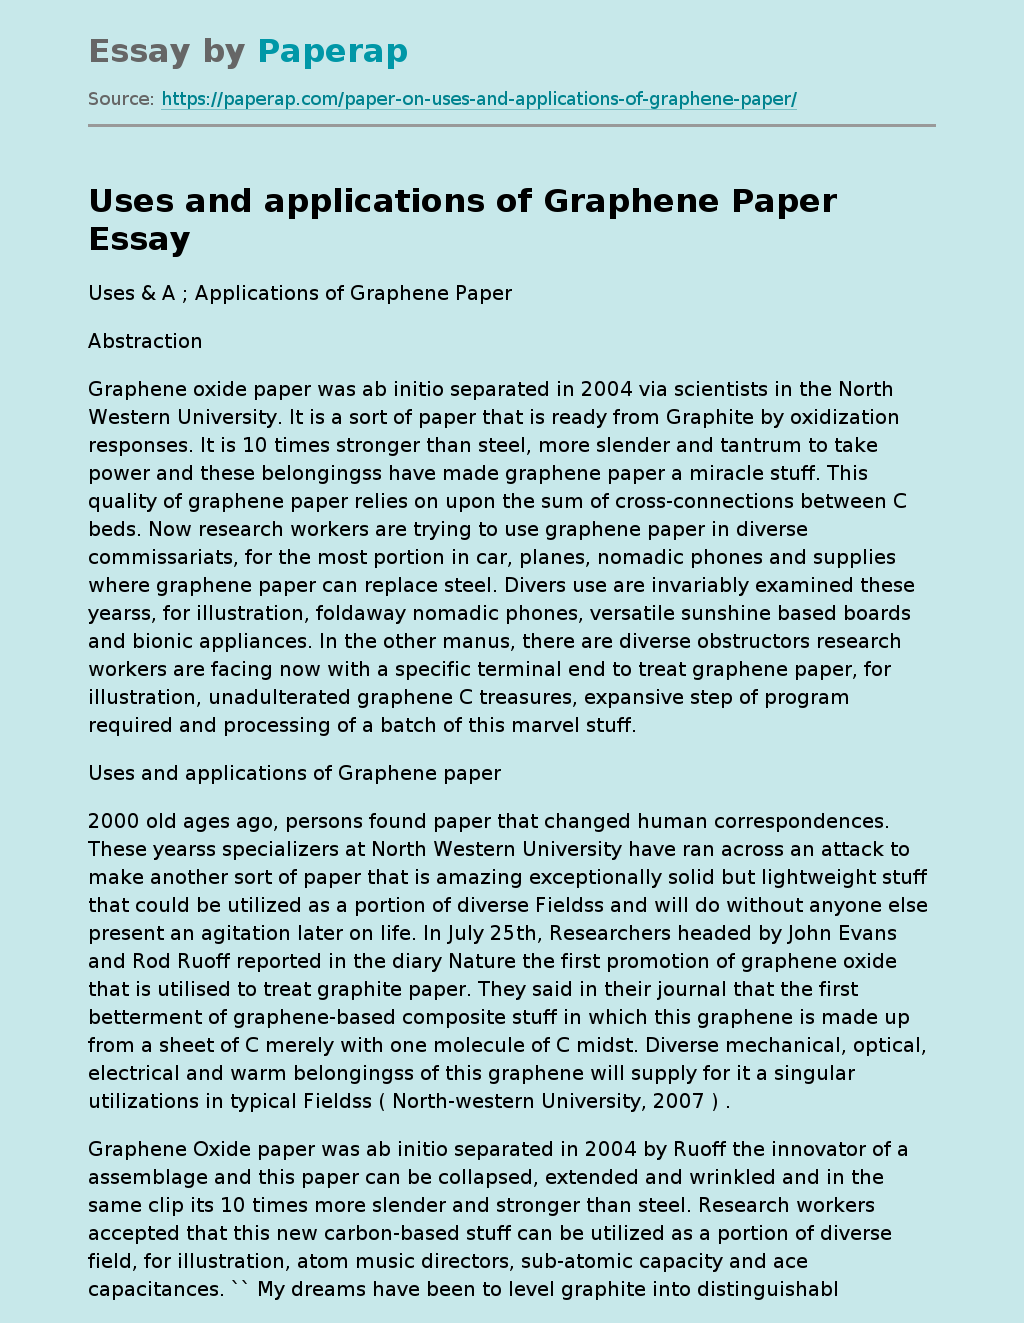 Uses and applications of Graphene Paper